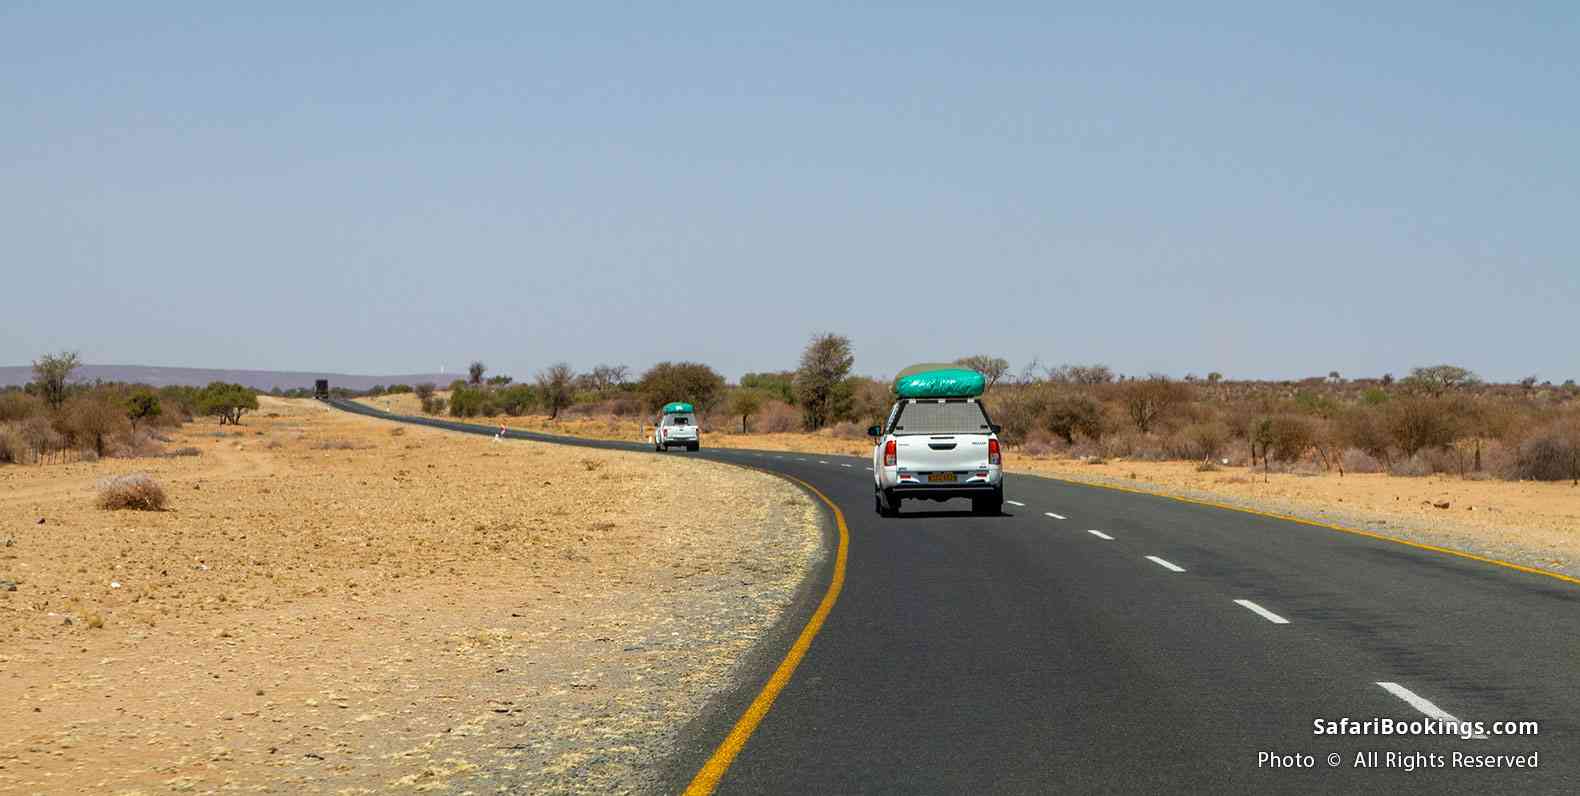 Driving left on the B1 highway in Namibia